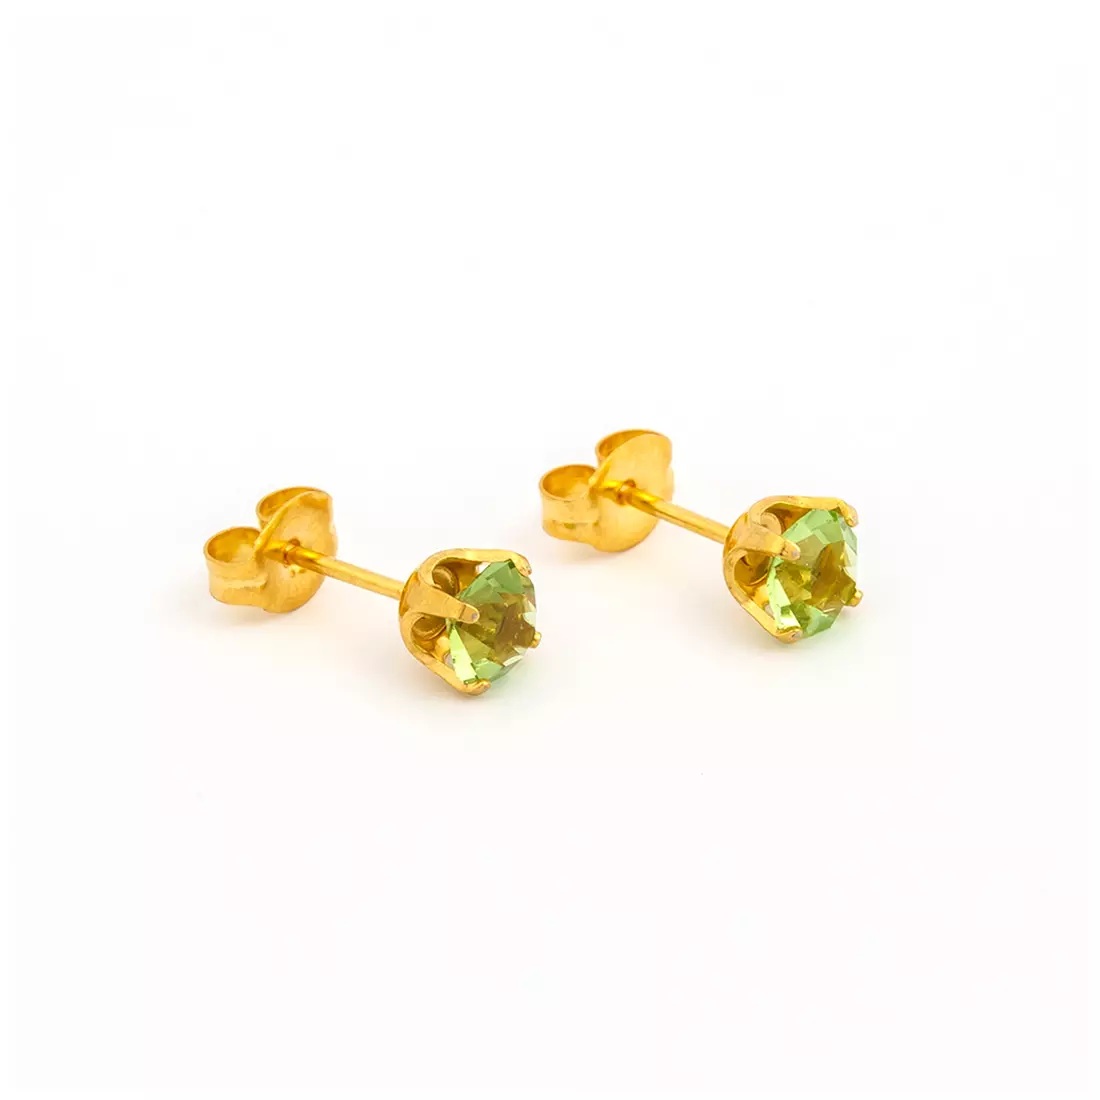 5MM August Peridot Emerald 24K Pure Gold Plated Ear Studs | Ideal for everyday wear